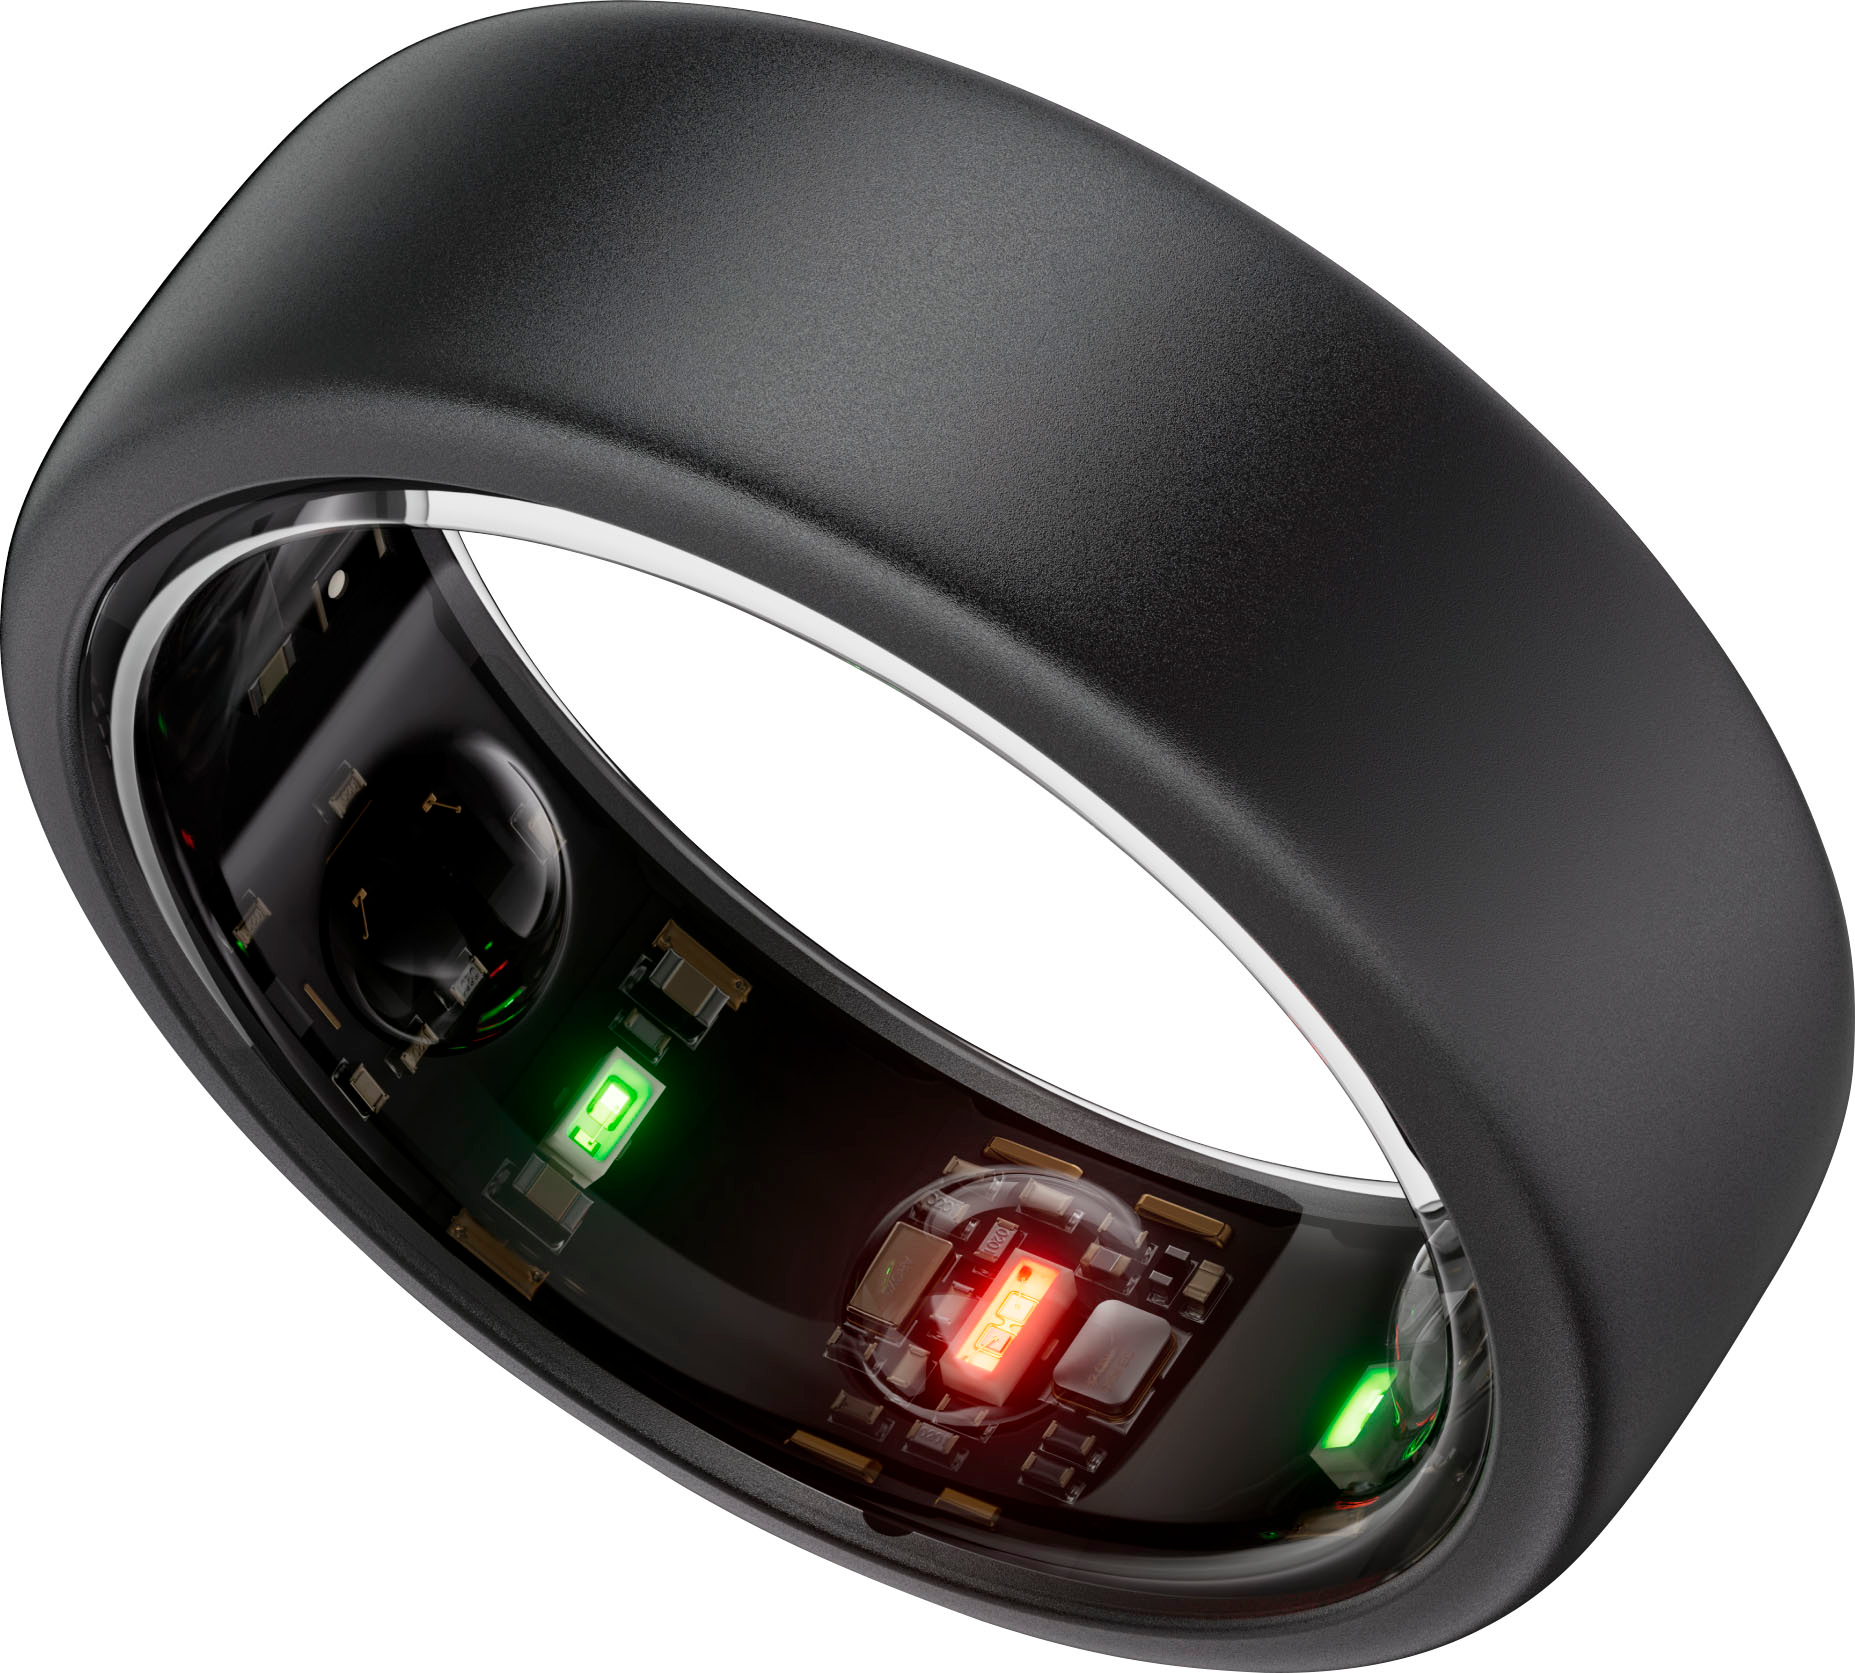 Oura's third-generation Ring is more powerful, but not for everybody